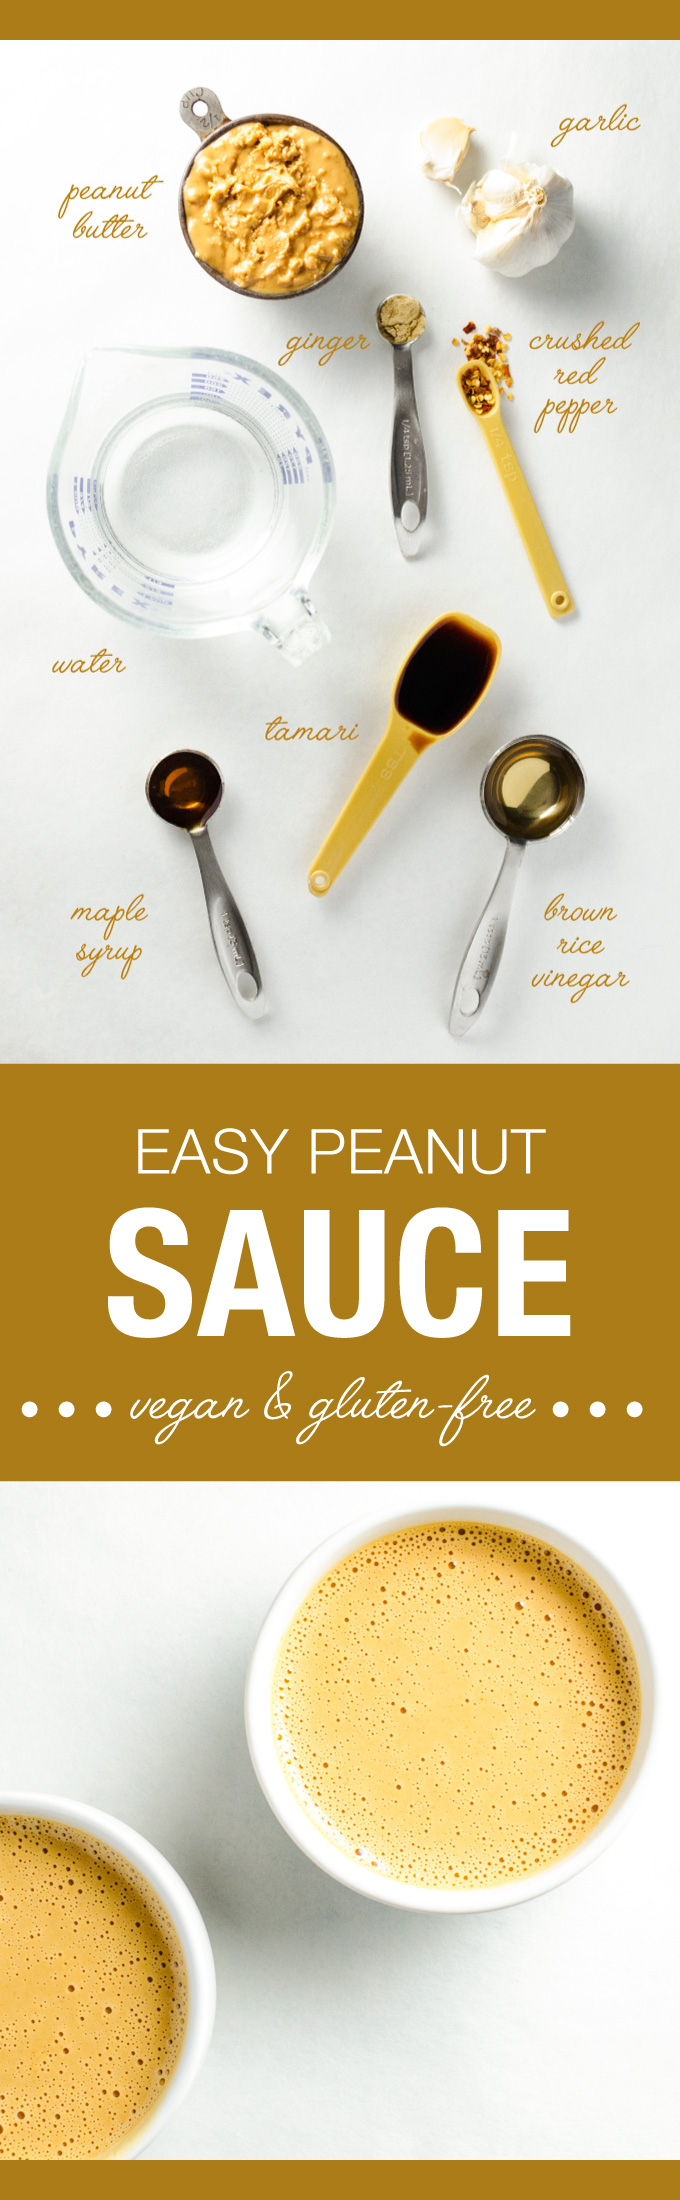 Easy Peanut Sauce - Whip up this simple blender recipe in minutes - this vegan and gluten-free sauce goes great with sushi, salad and spring rolls! | VeggiePrimer.com